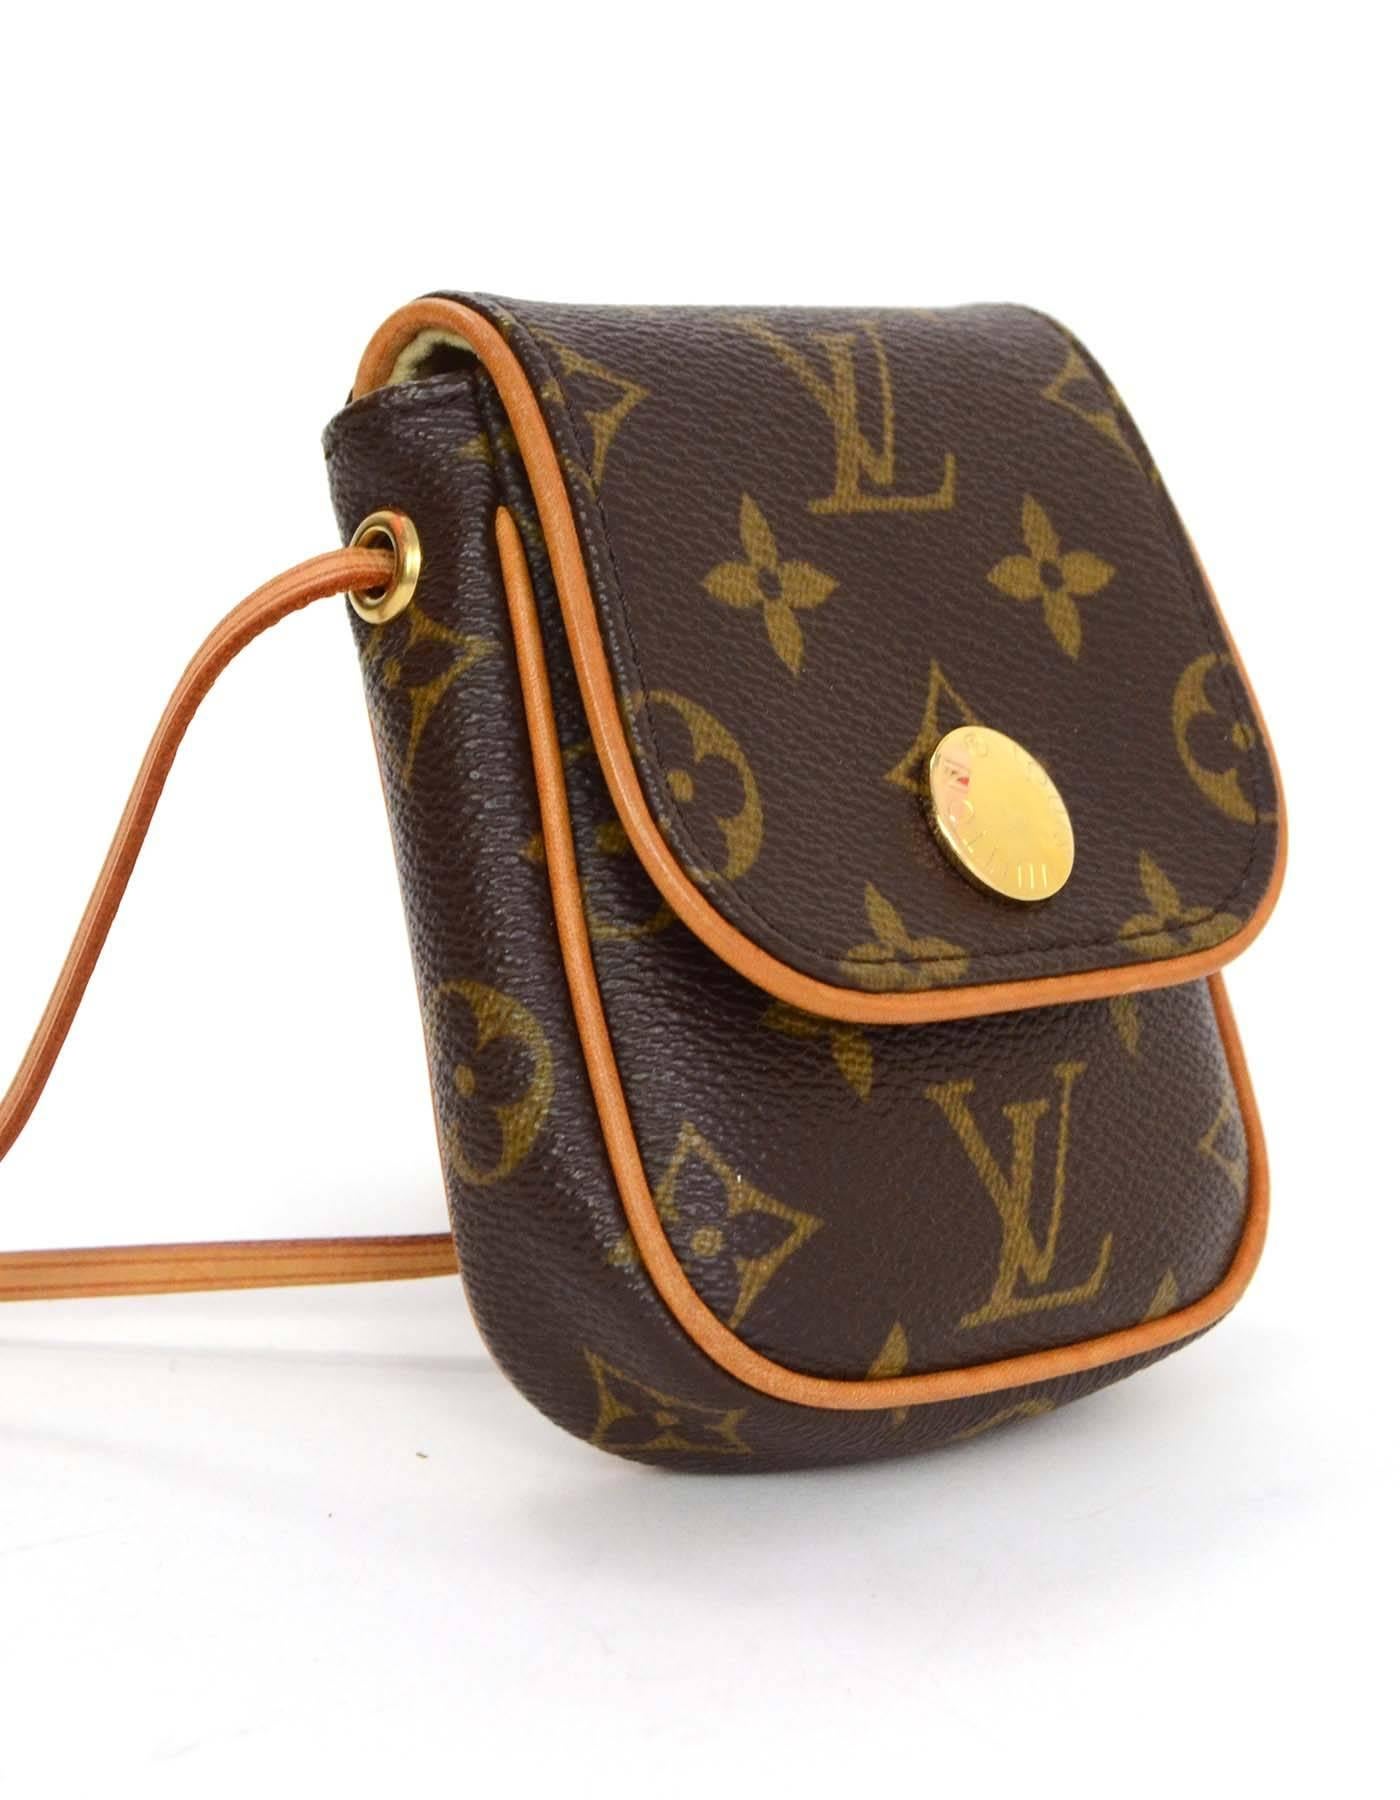 Louis Vuitton Monogram Cancun Mini Crossbody Bag

Features flap top with snap closure. 

    Made In: France
    Year of Production: 2006
    Materials: Canvas and leather
    Hardware: Goldtone
    Lining: Beige alcantara
    Closure: Flap